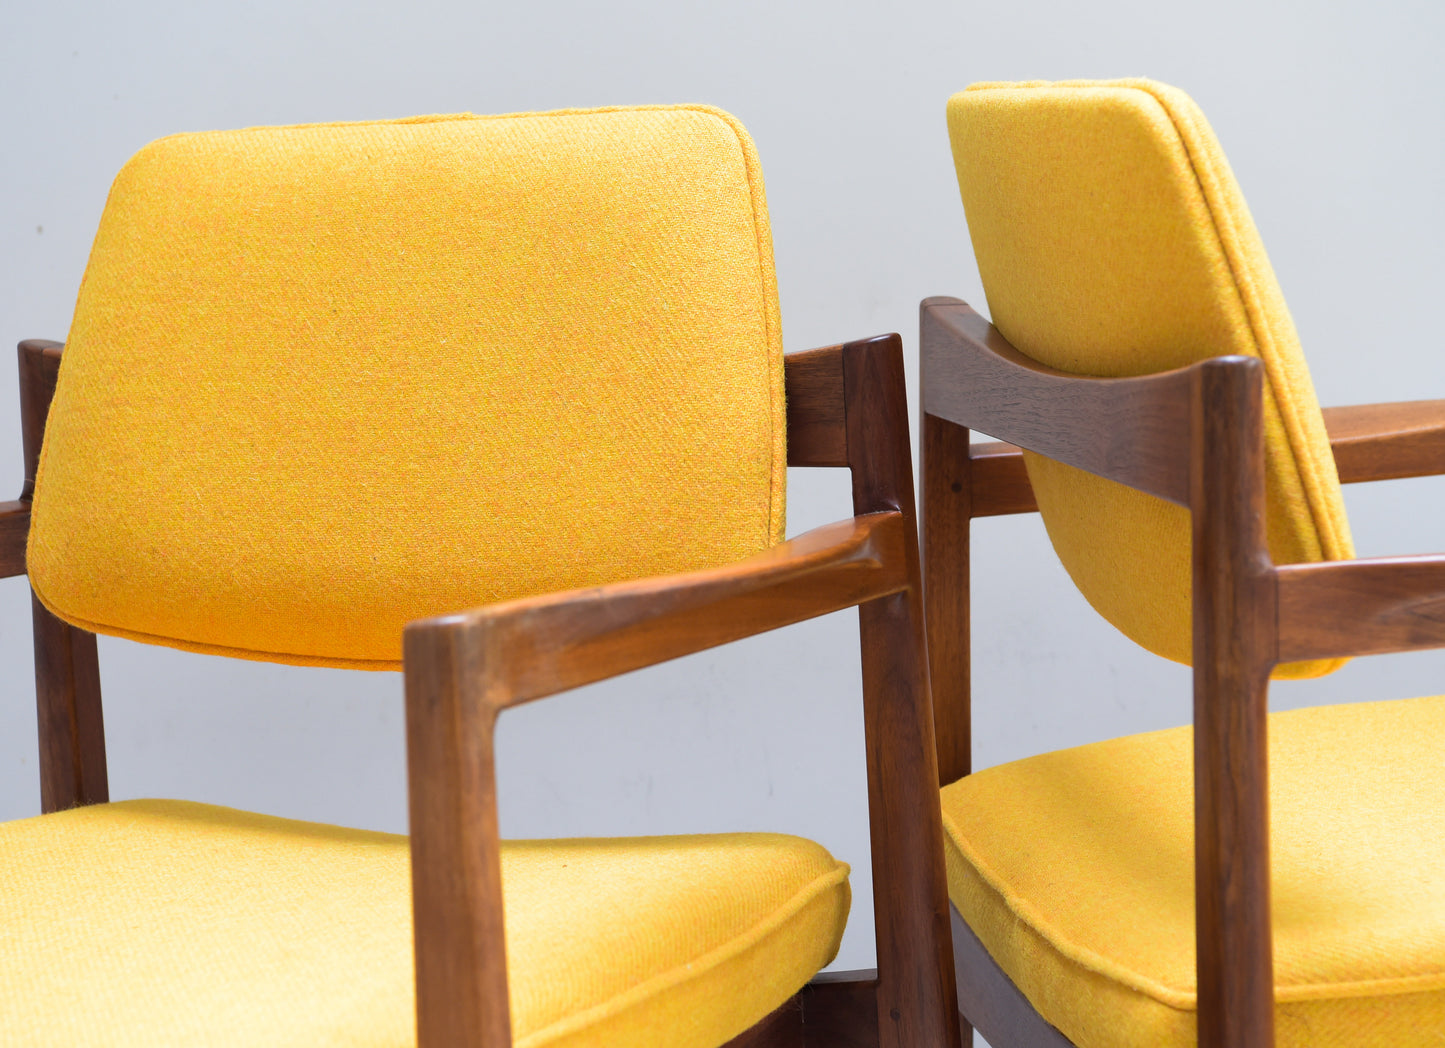 Two Arm Chairs By Jens Risom In Walnut Re Upholstered In Harris Tweed Circa 1968.